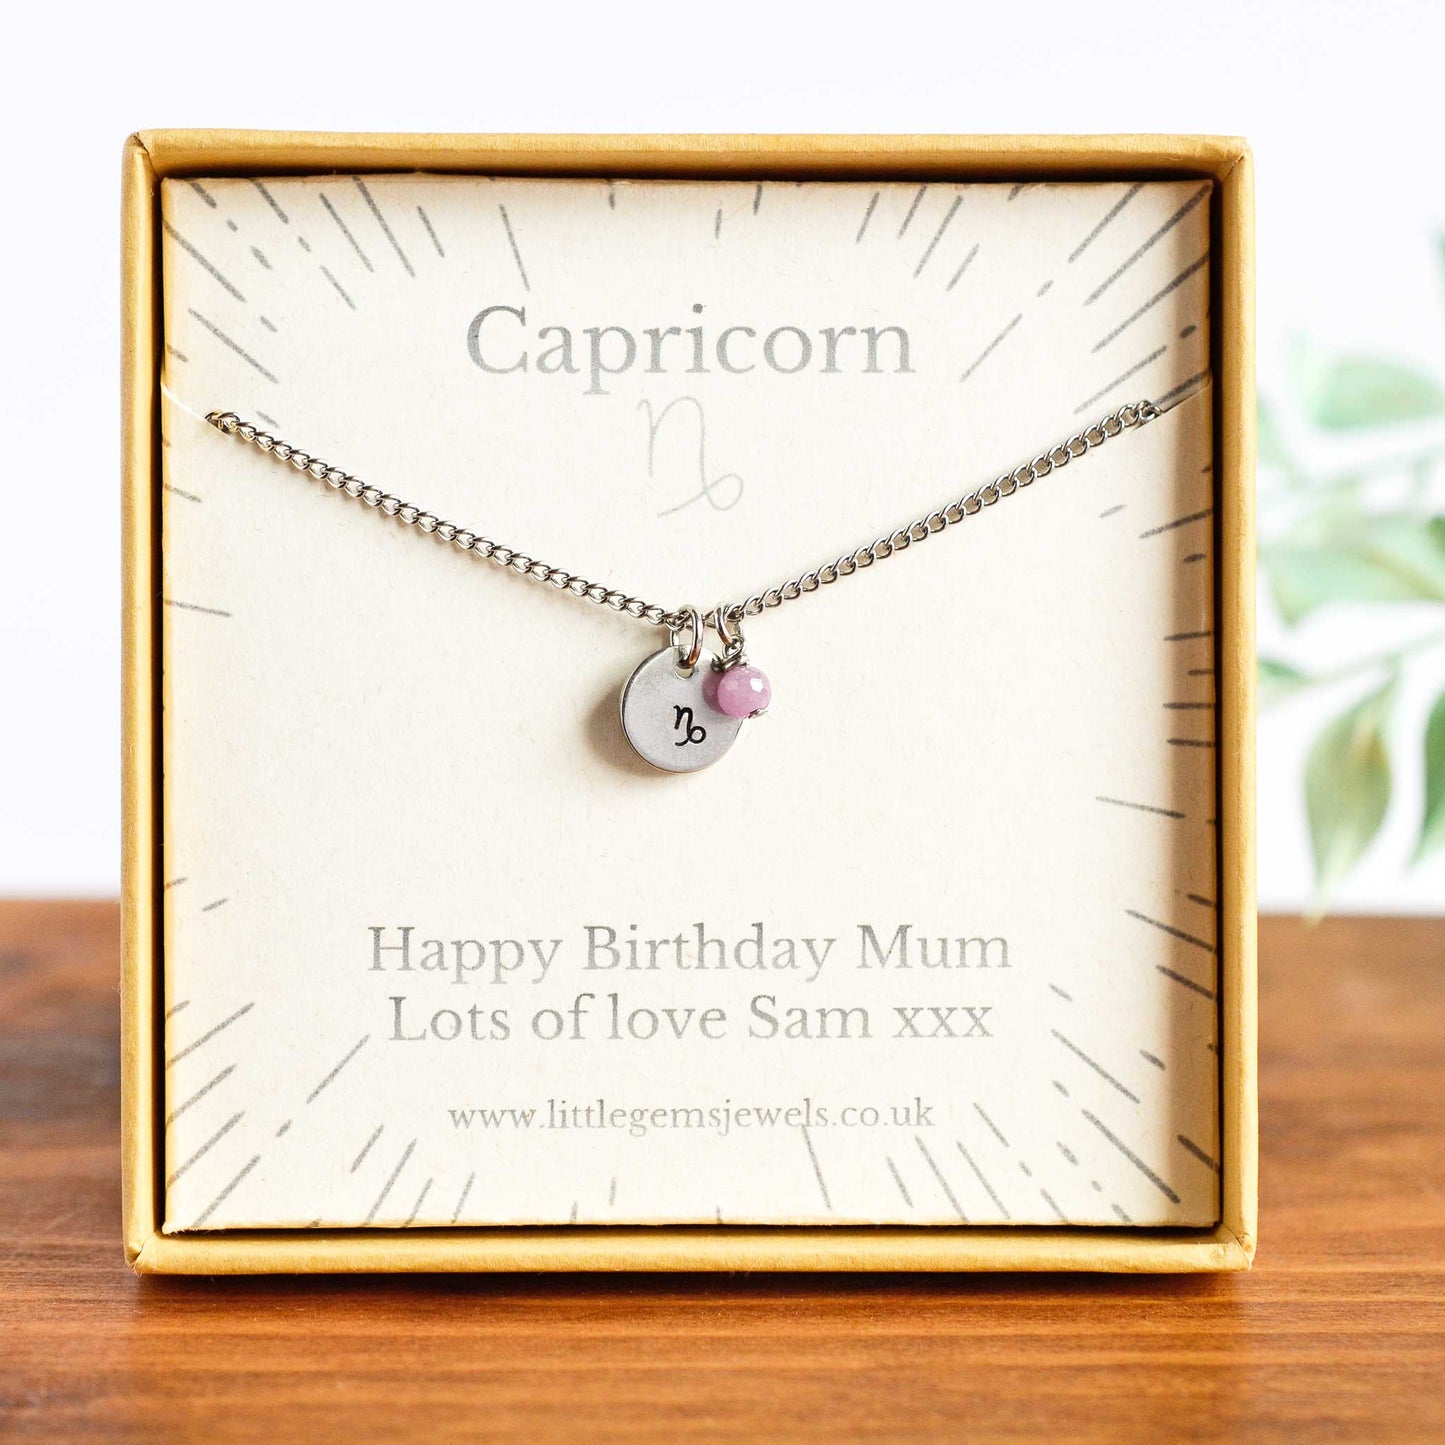 Capricorn Zodiac necklace with personalised gift message in eco friendly gift box